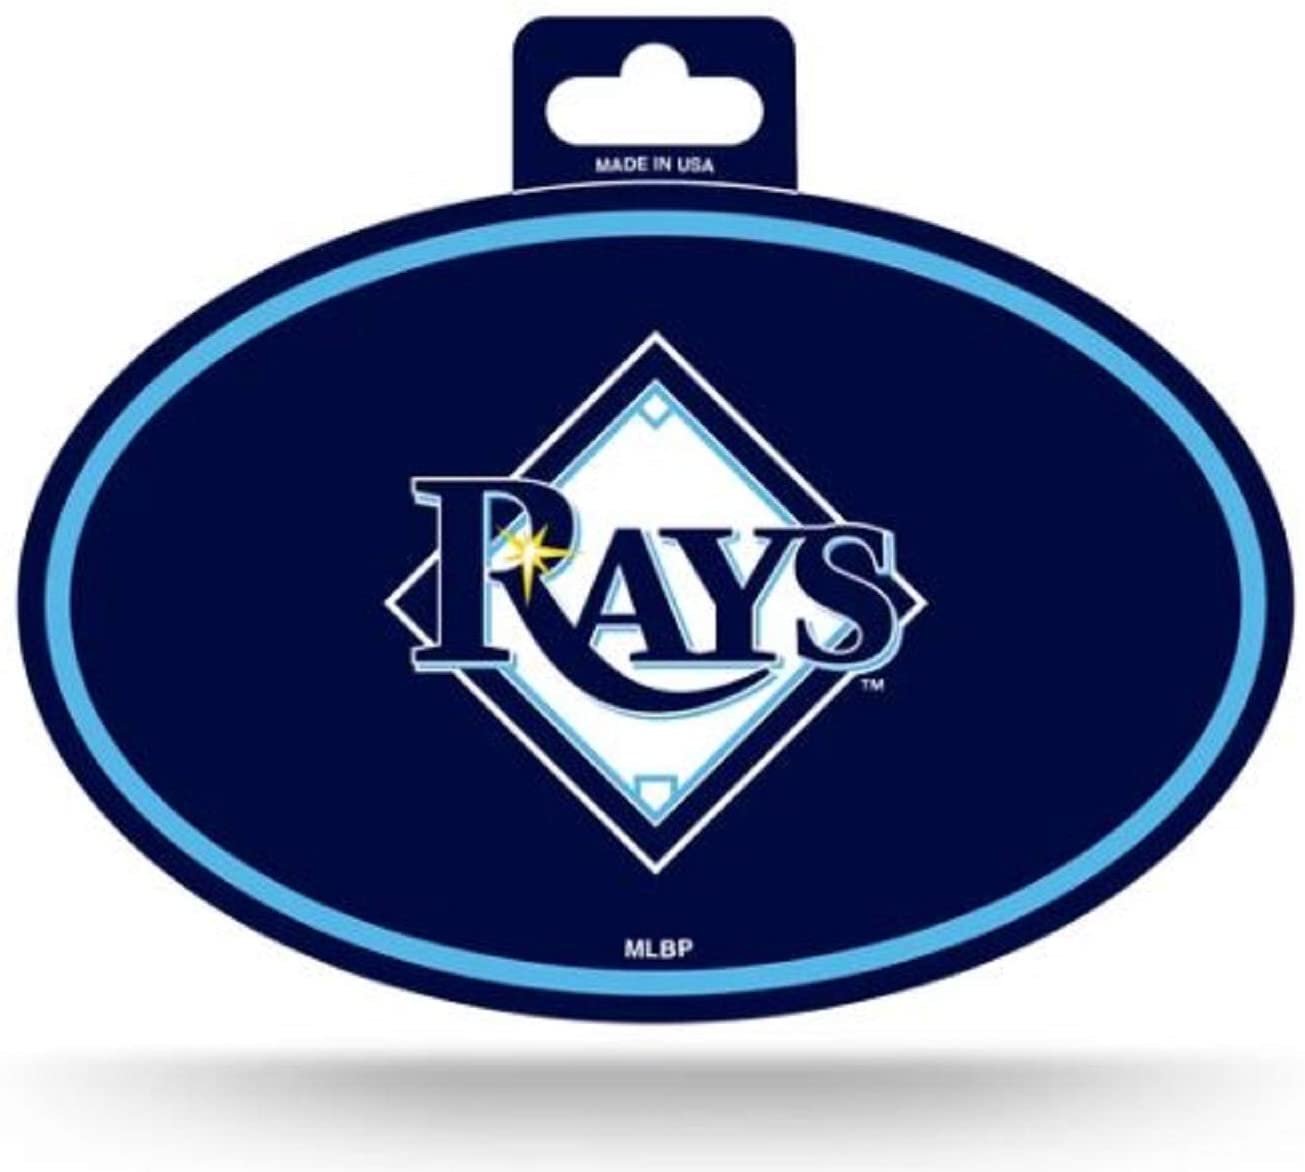 Tampa Bay Rays Color Team Logo Oval Sticker Decal, 3.75x5.75 Inch, Full Adhesive Backing